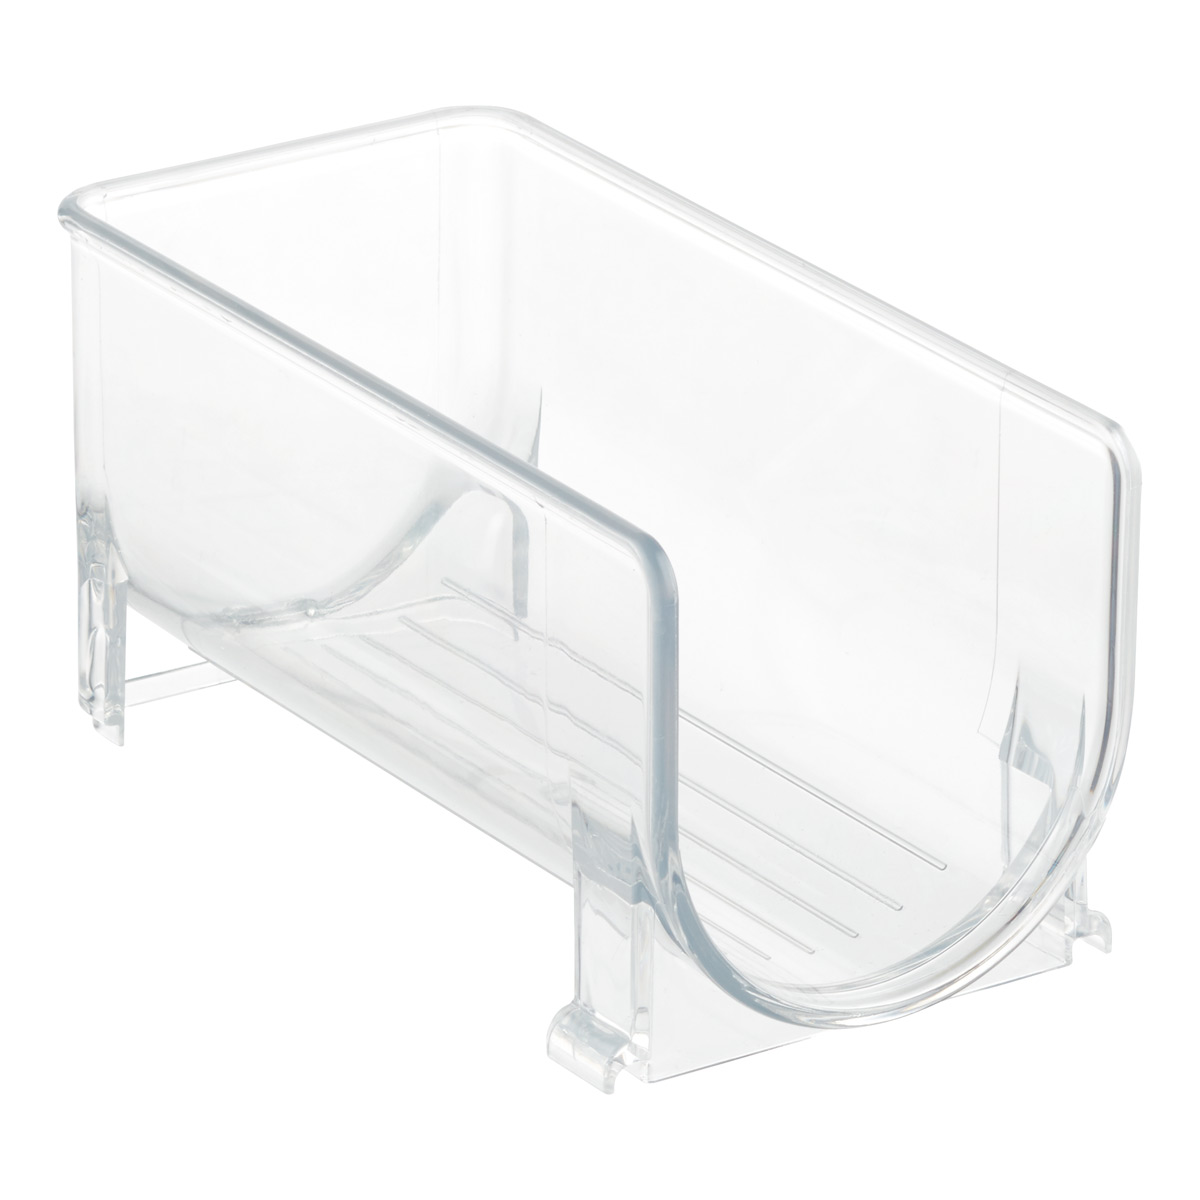 Clear Addis Wine Bottle 70-75cl Fridge Kitchen Pantry Refrigerator Catering Storage Container Holder 21 x 11.5 x 10.5 cm